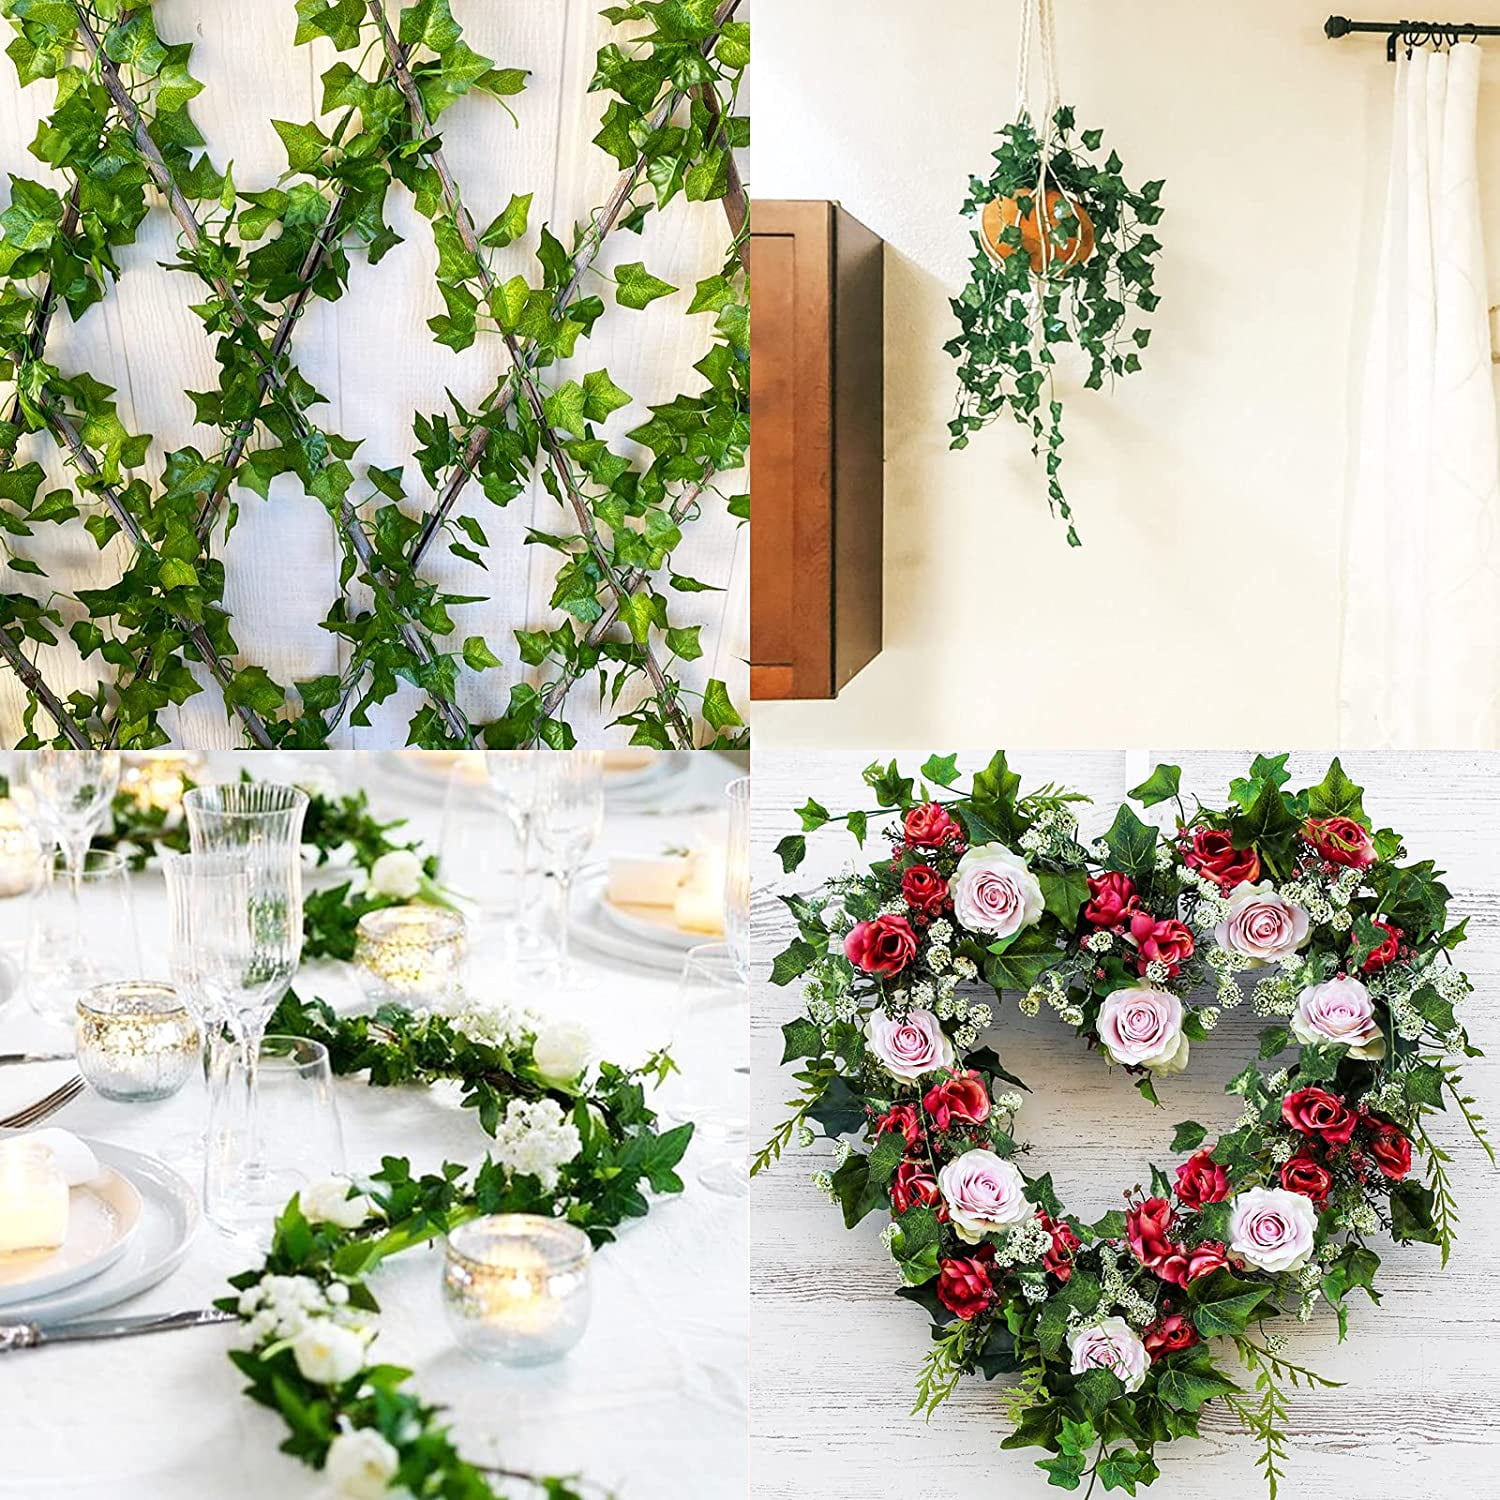 Artificial Ivy Vines Leaves, Garland Fake Greenery Hanging Leaf Plants for Wedding, Wall Decor, Party, Room, Garden, Home Decor